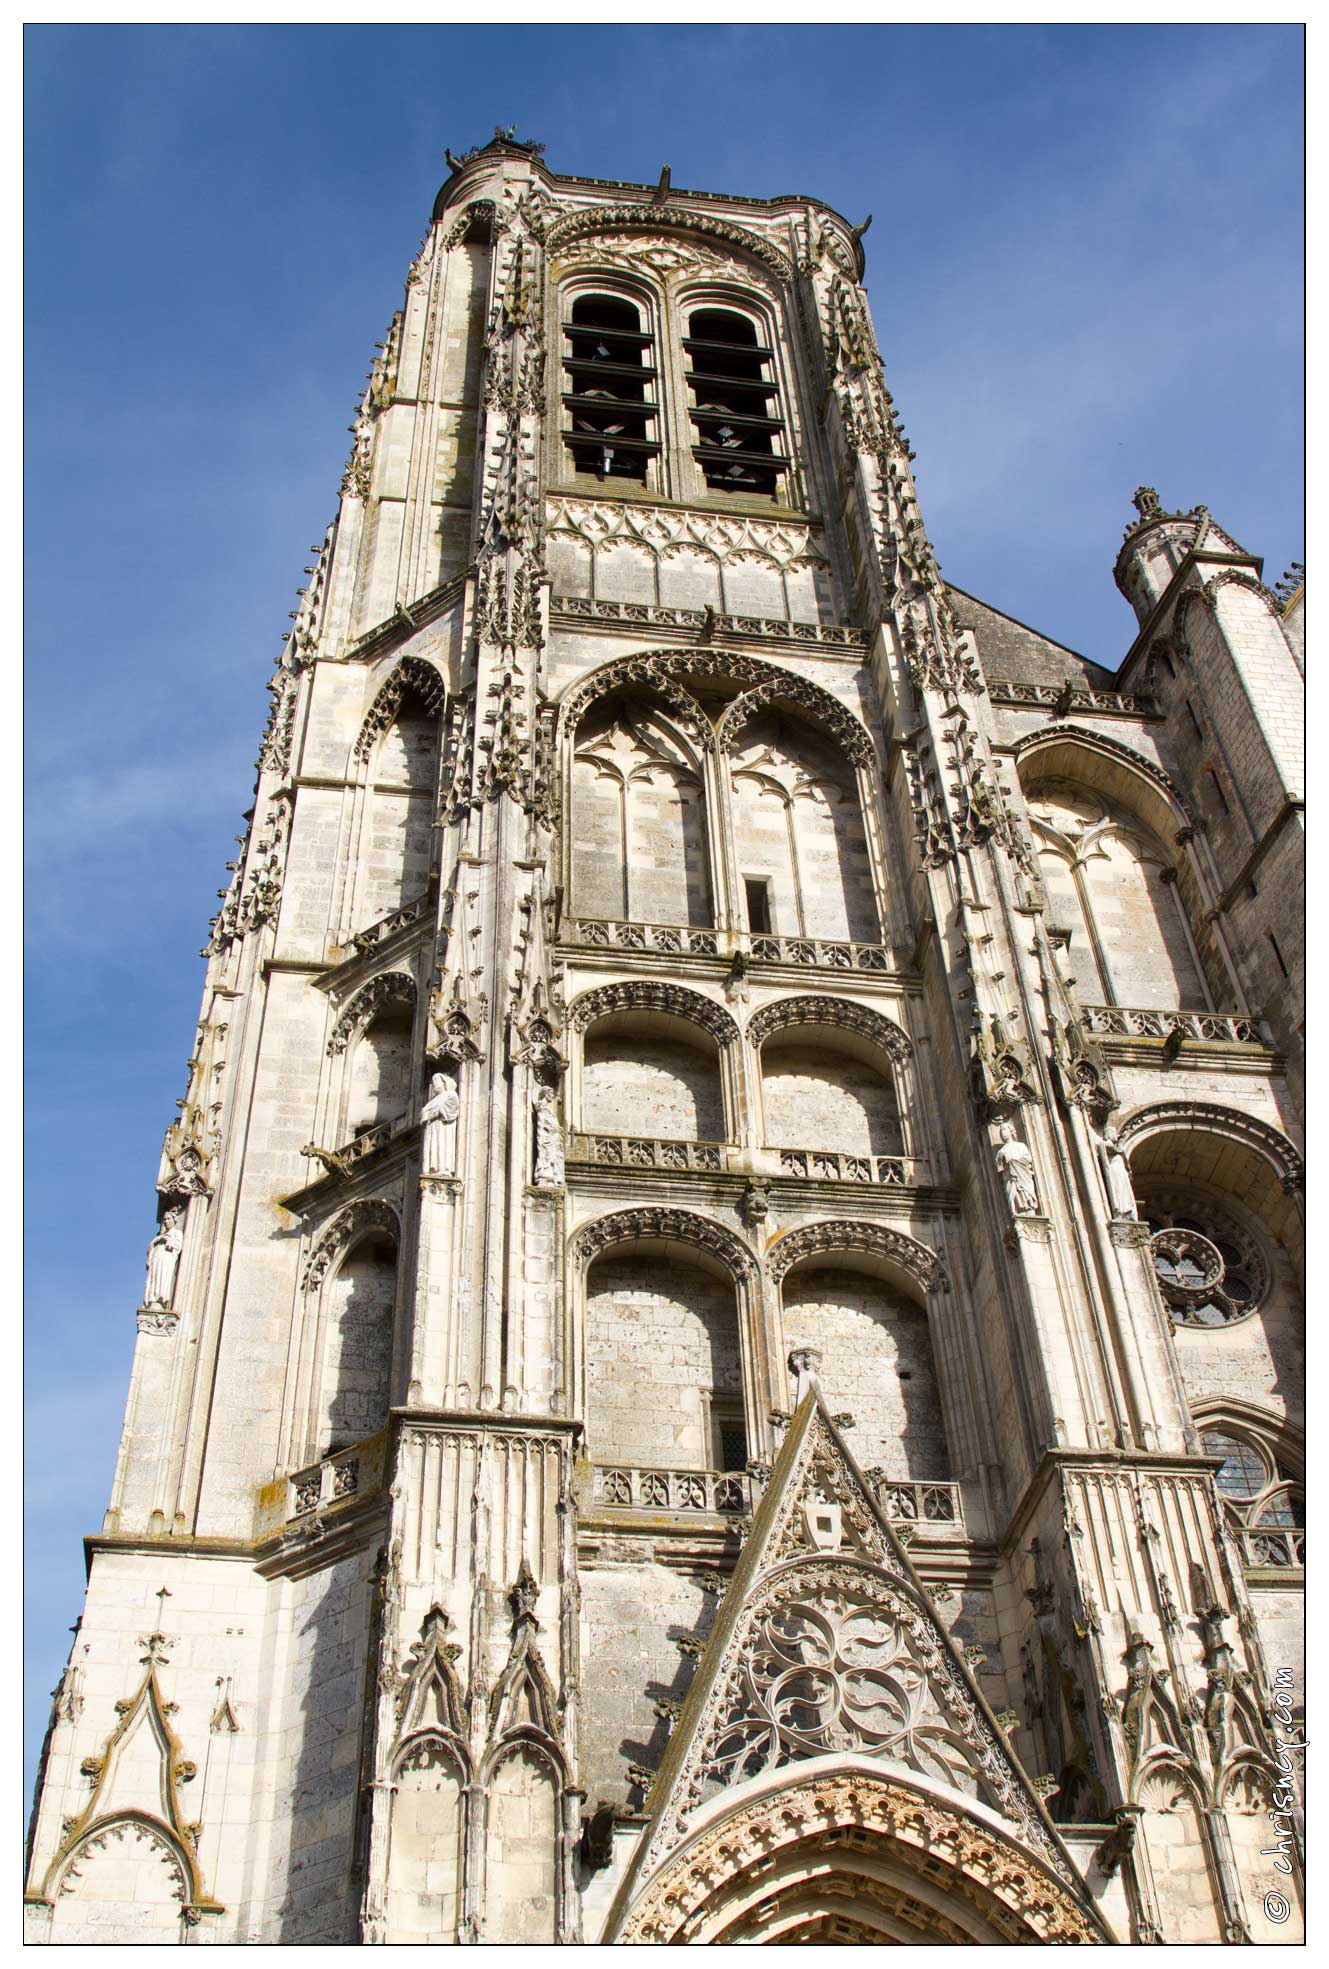 20120510-39_1059-Bourges_Cathedrale_Saint_Etienne.jpg